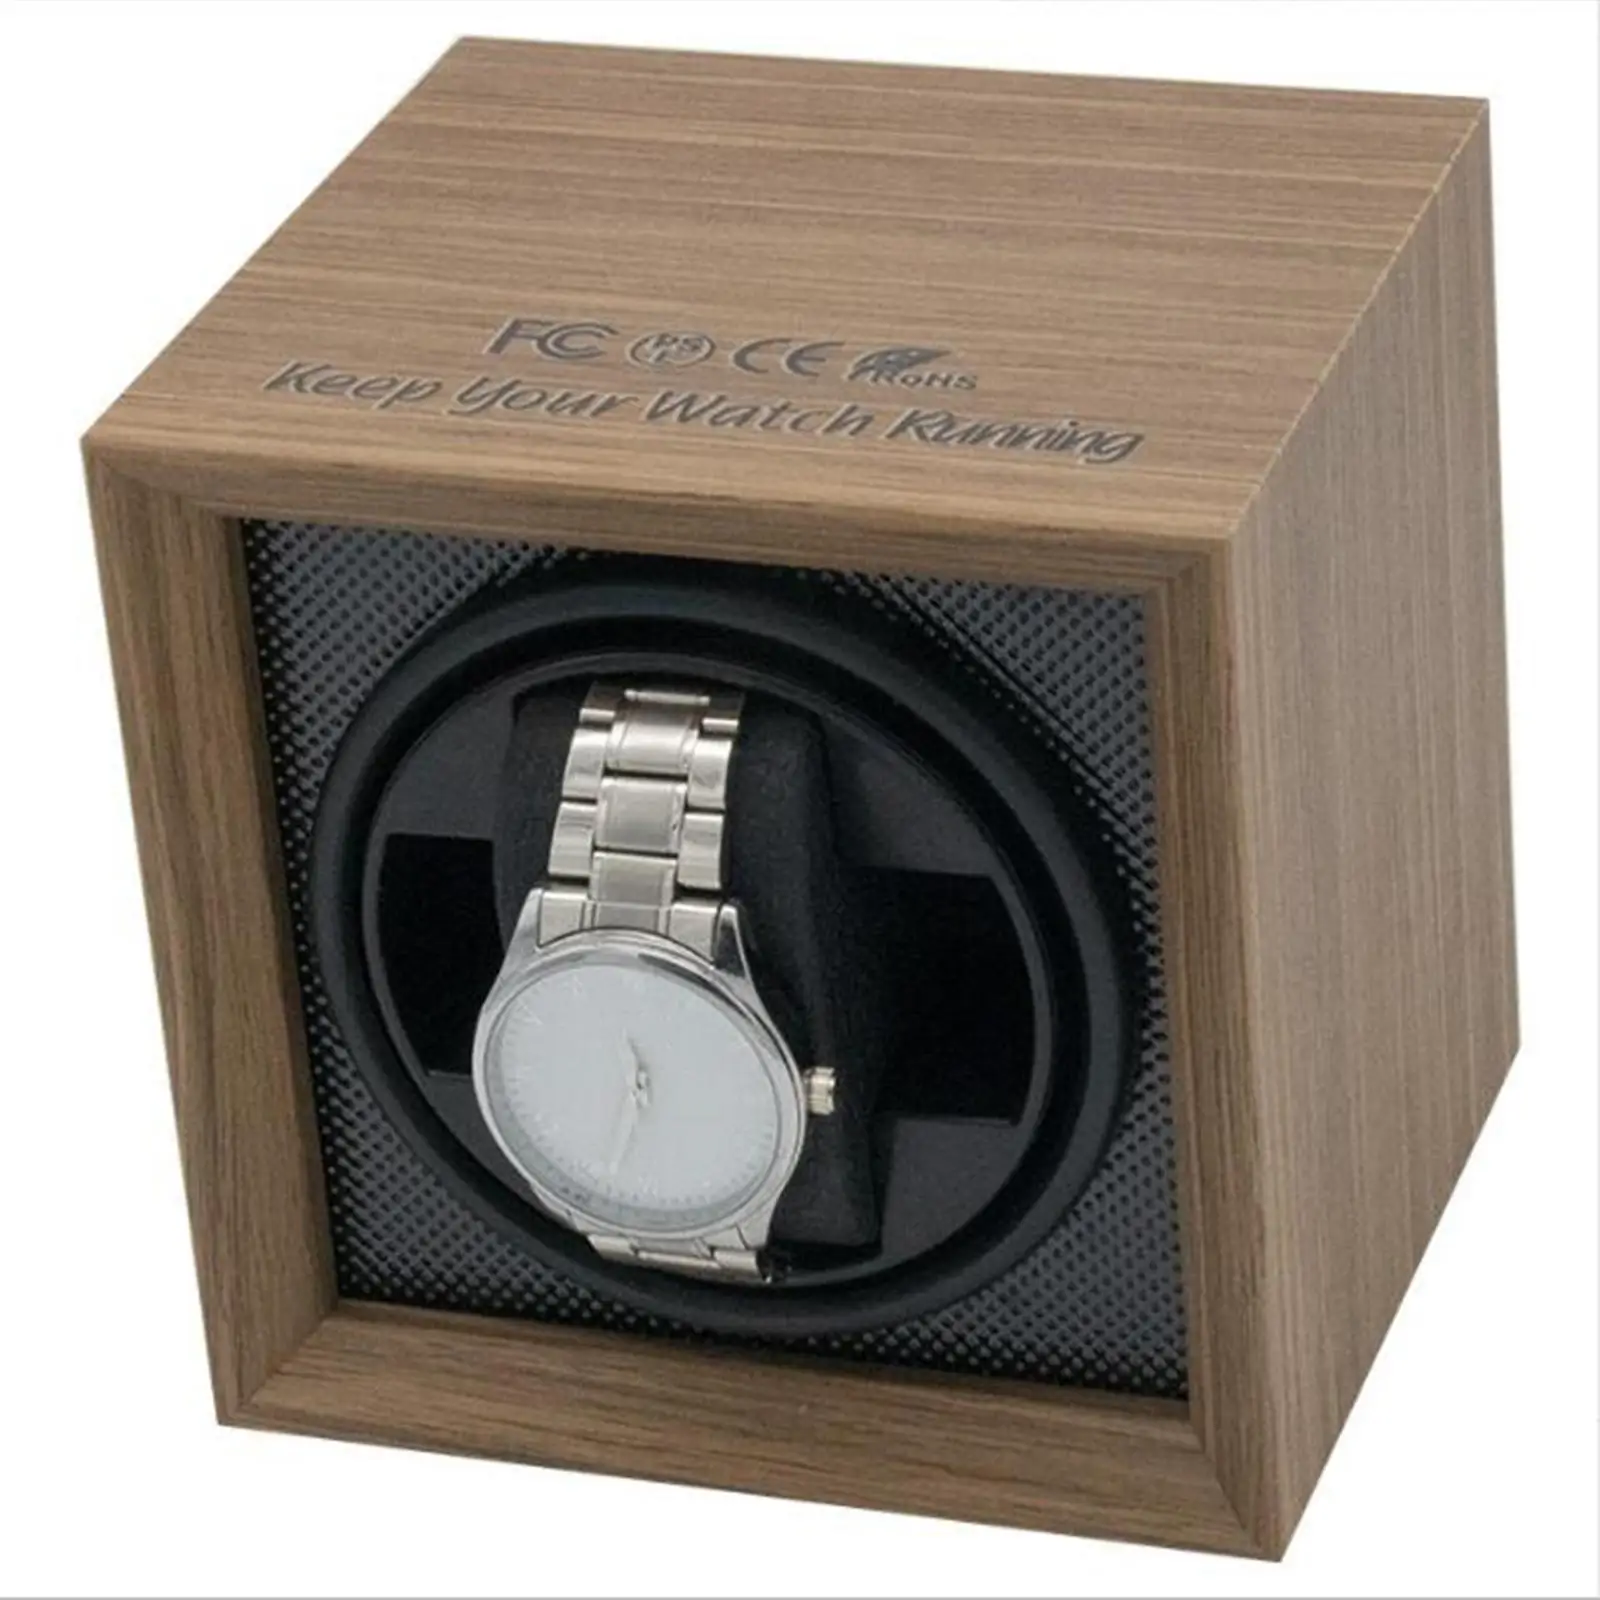 Automatic Single , Winding  with  Motor Flexible Pillow Collector Display Box for Men and Women Watches